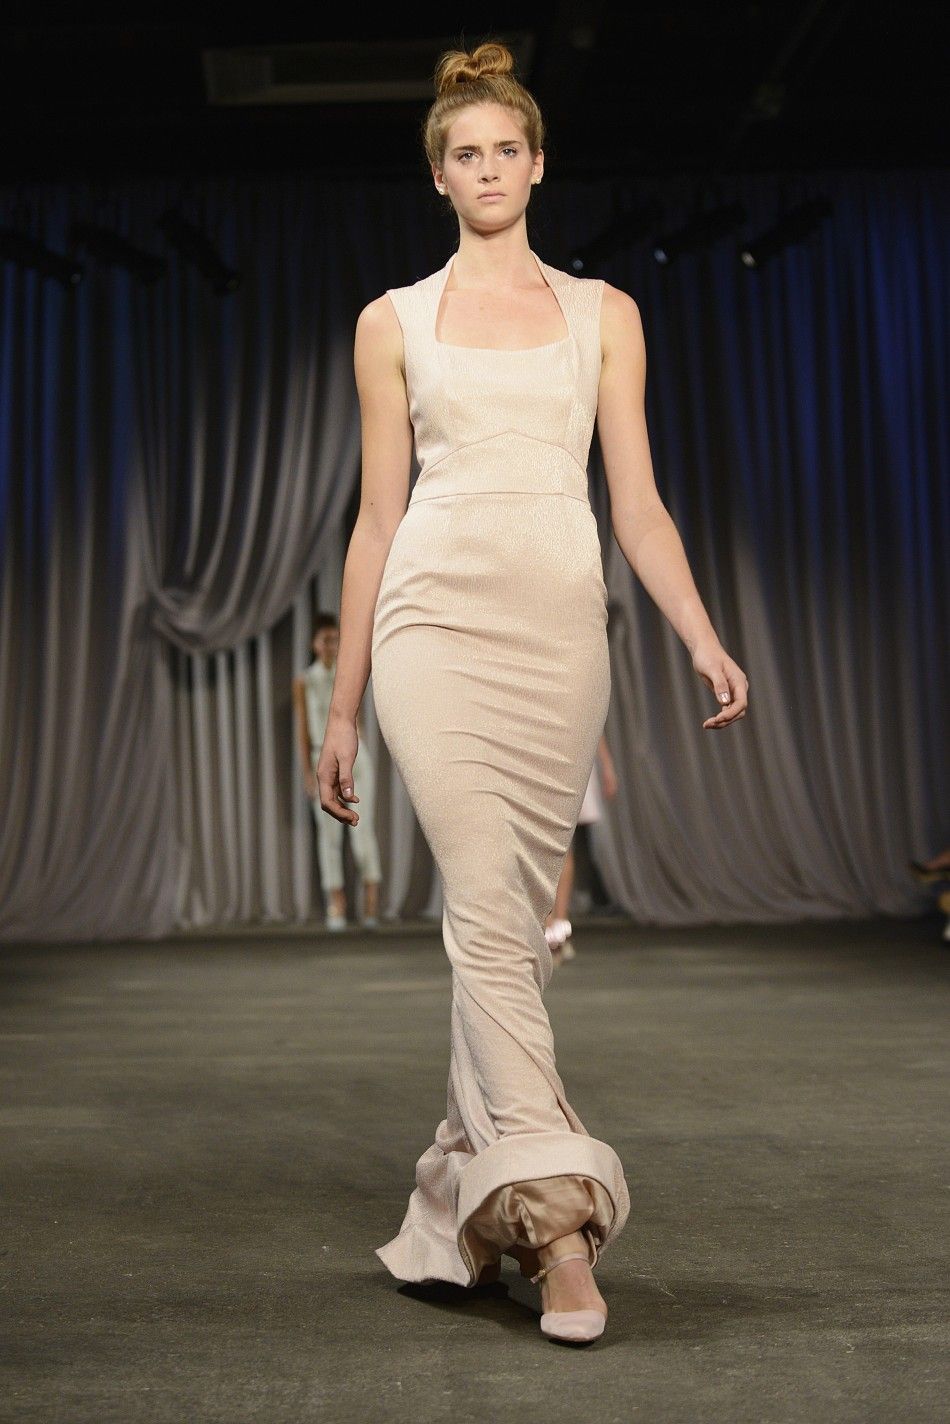 The Christian Siriano Spring 2013 collection at New York Fashion Week, Sept. 8, 2012